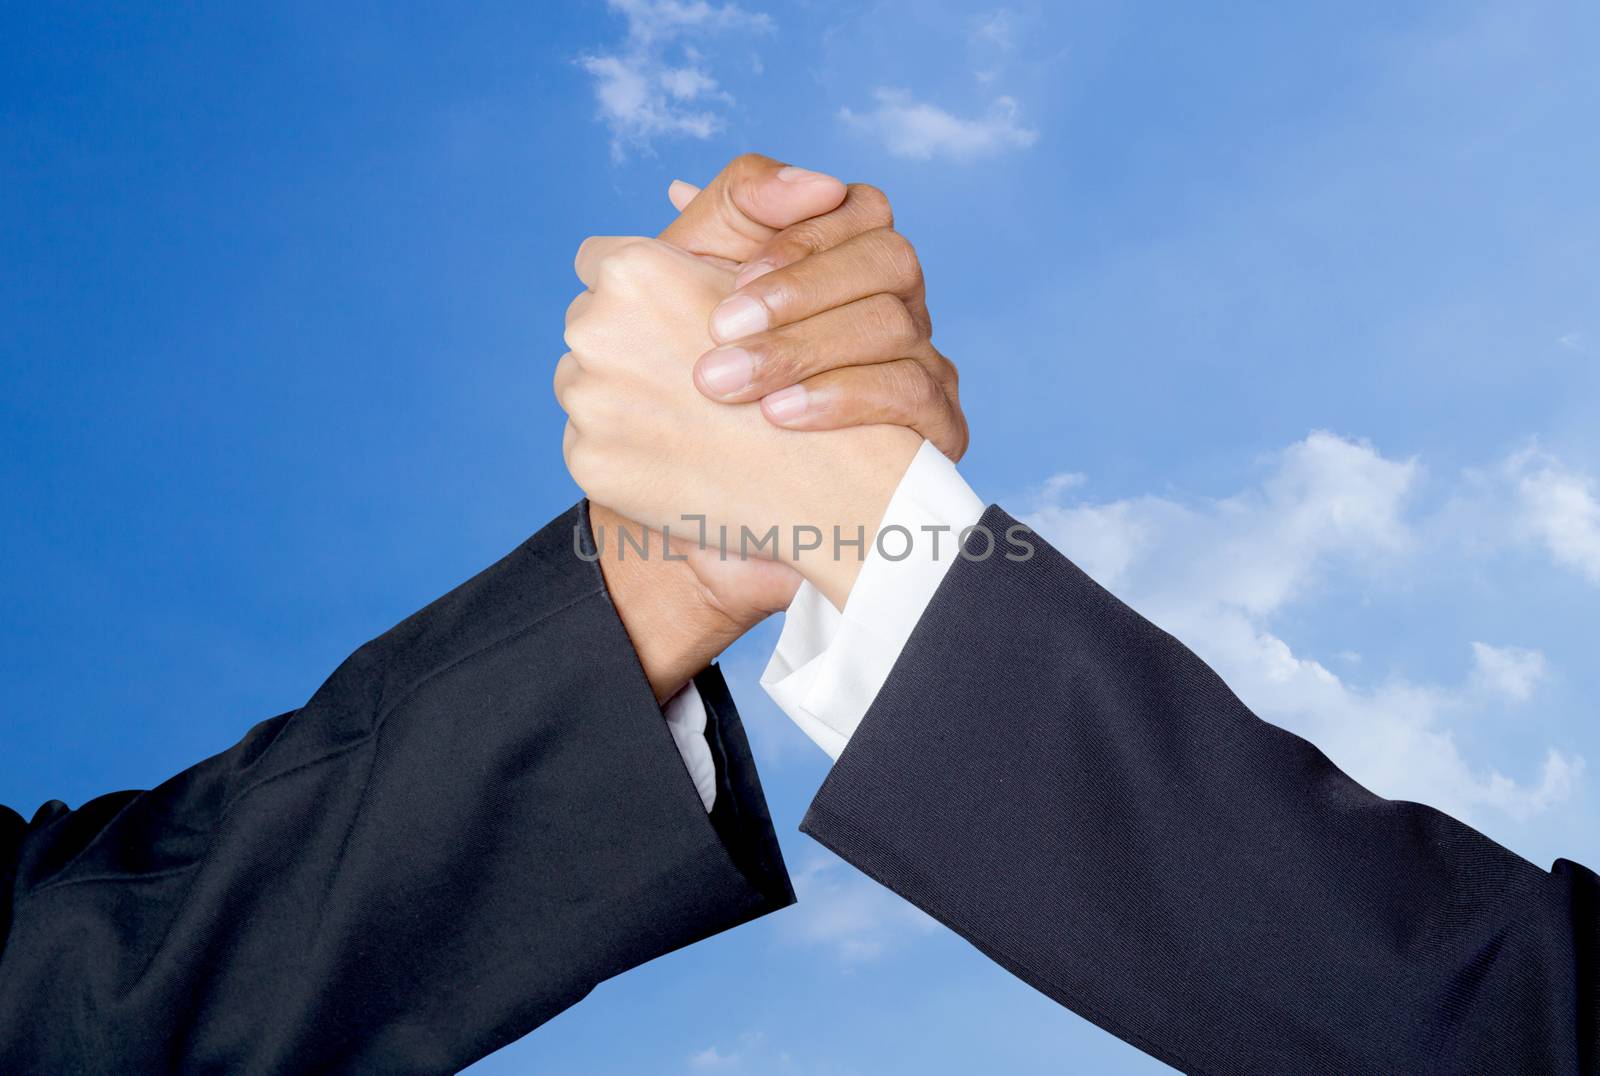 Hand shake between a businessman and a businesswoman sky background